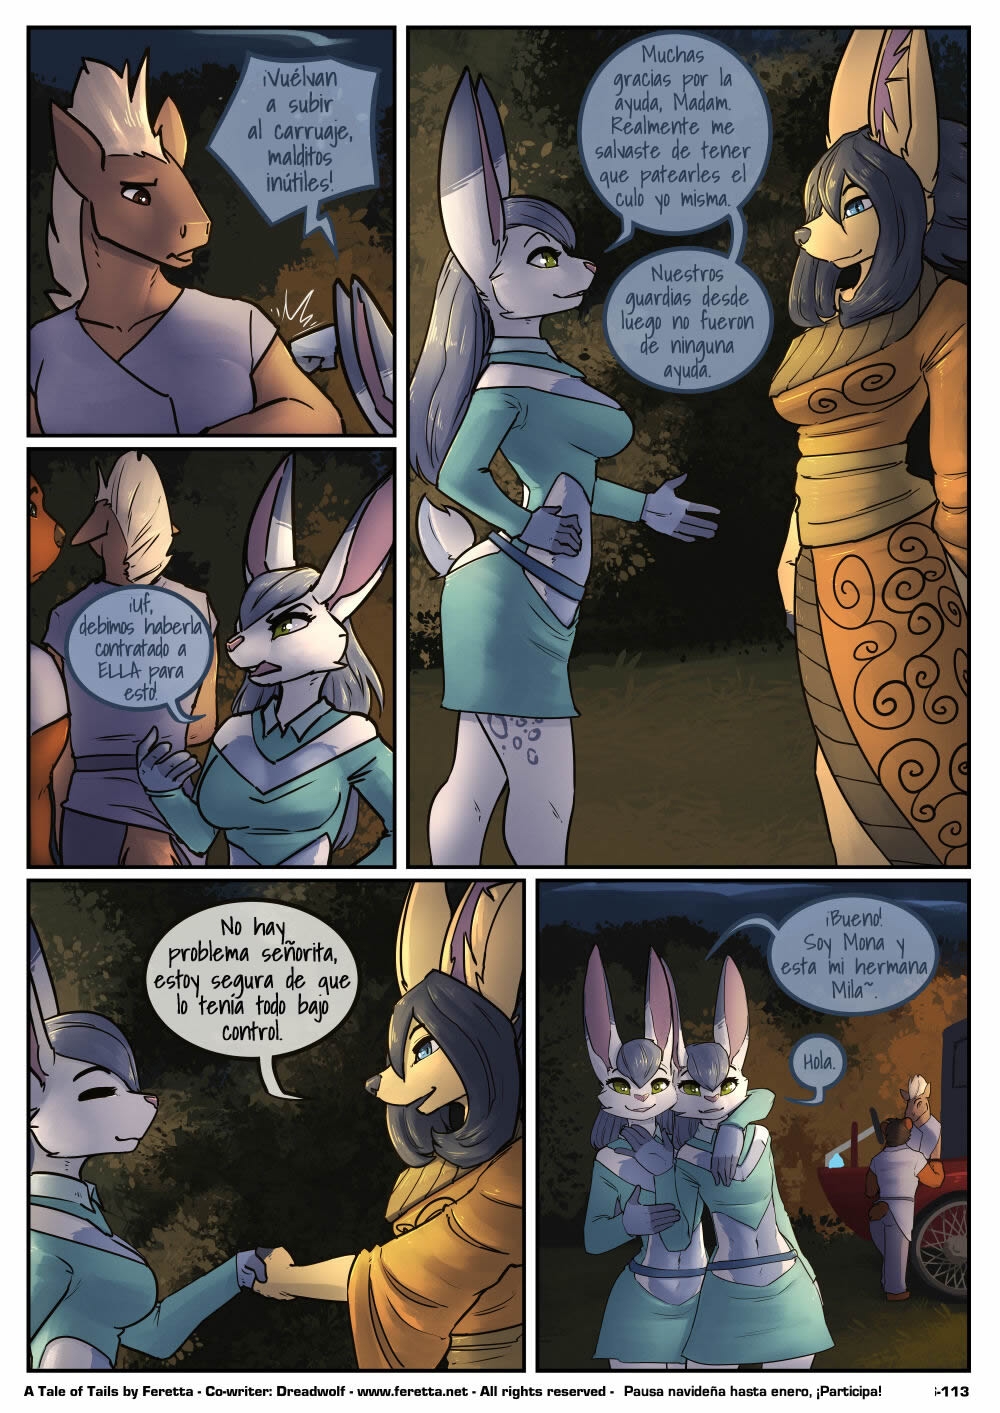 [Feretta] A Tale of Tails: Chapter 6 - Paths converge / Los caminos convergen [Spanish] [Red Fox Makkan] 113